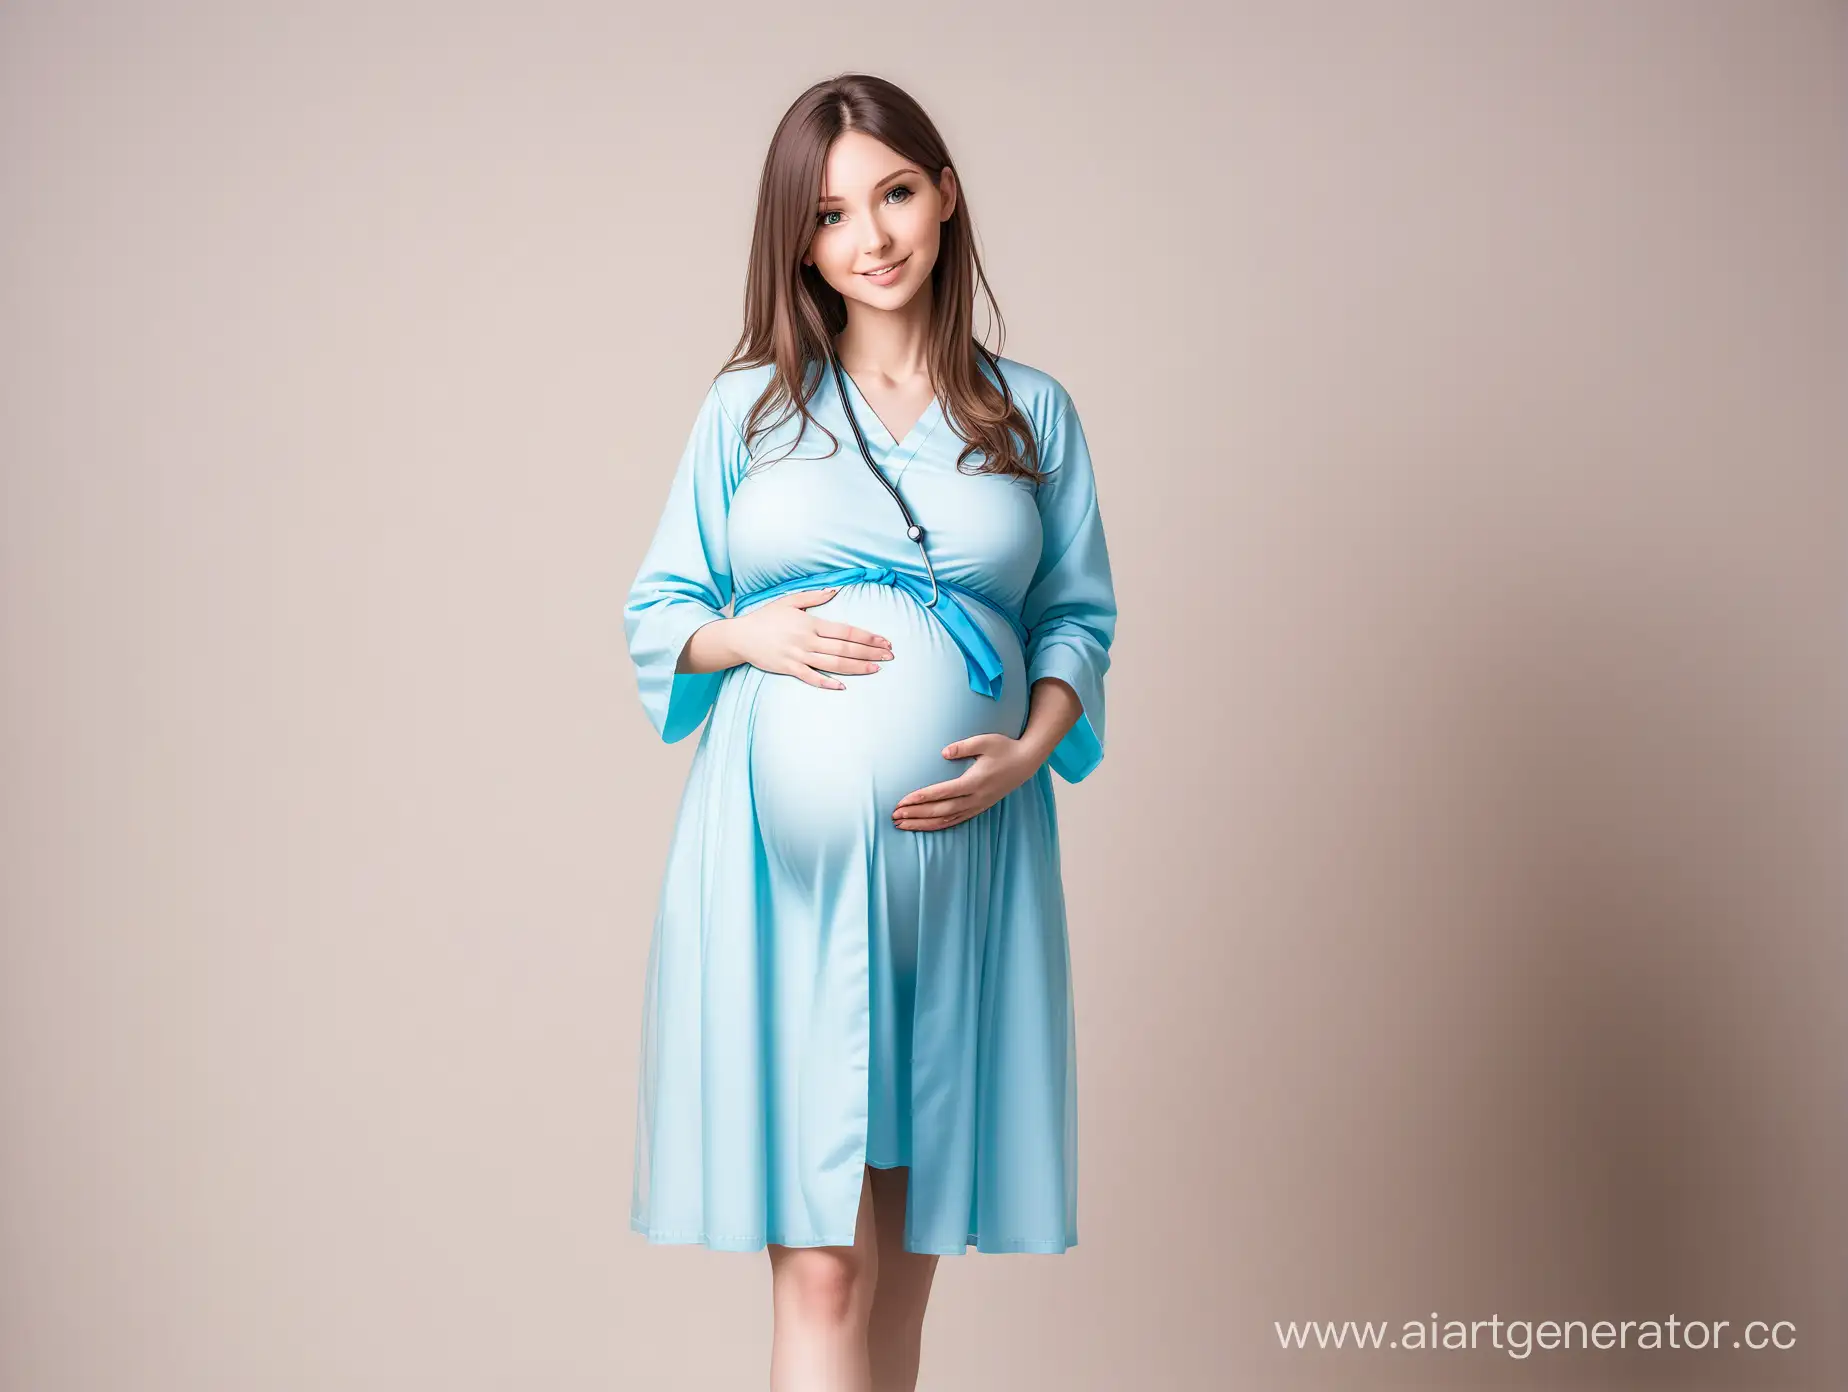 Expectant-Mother-in-Medical-Gown